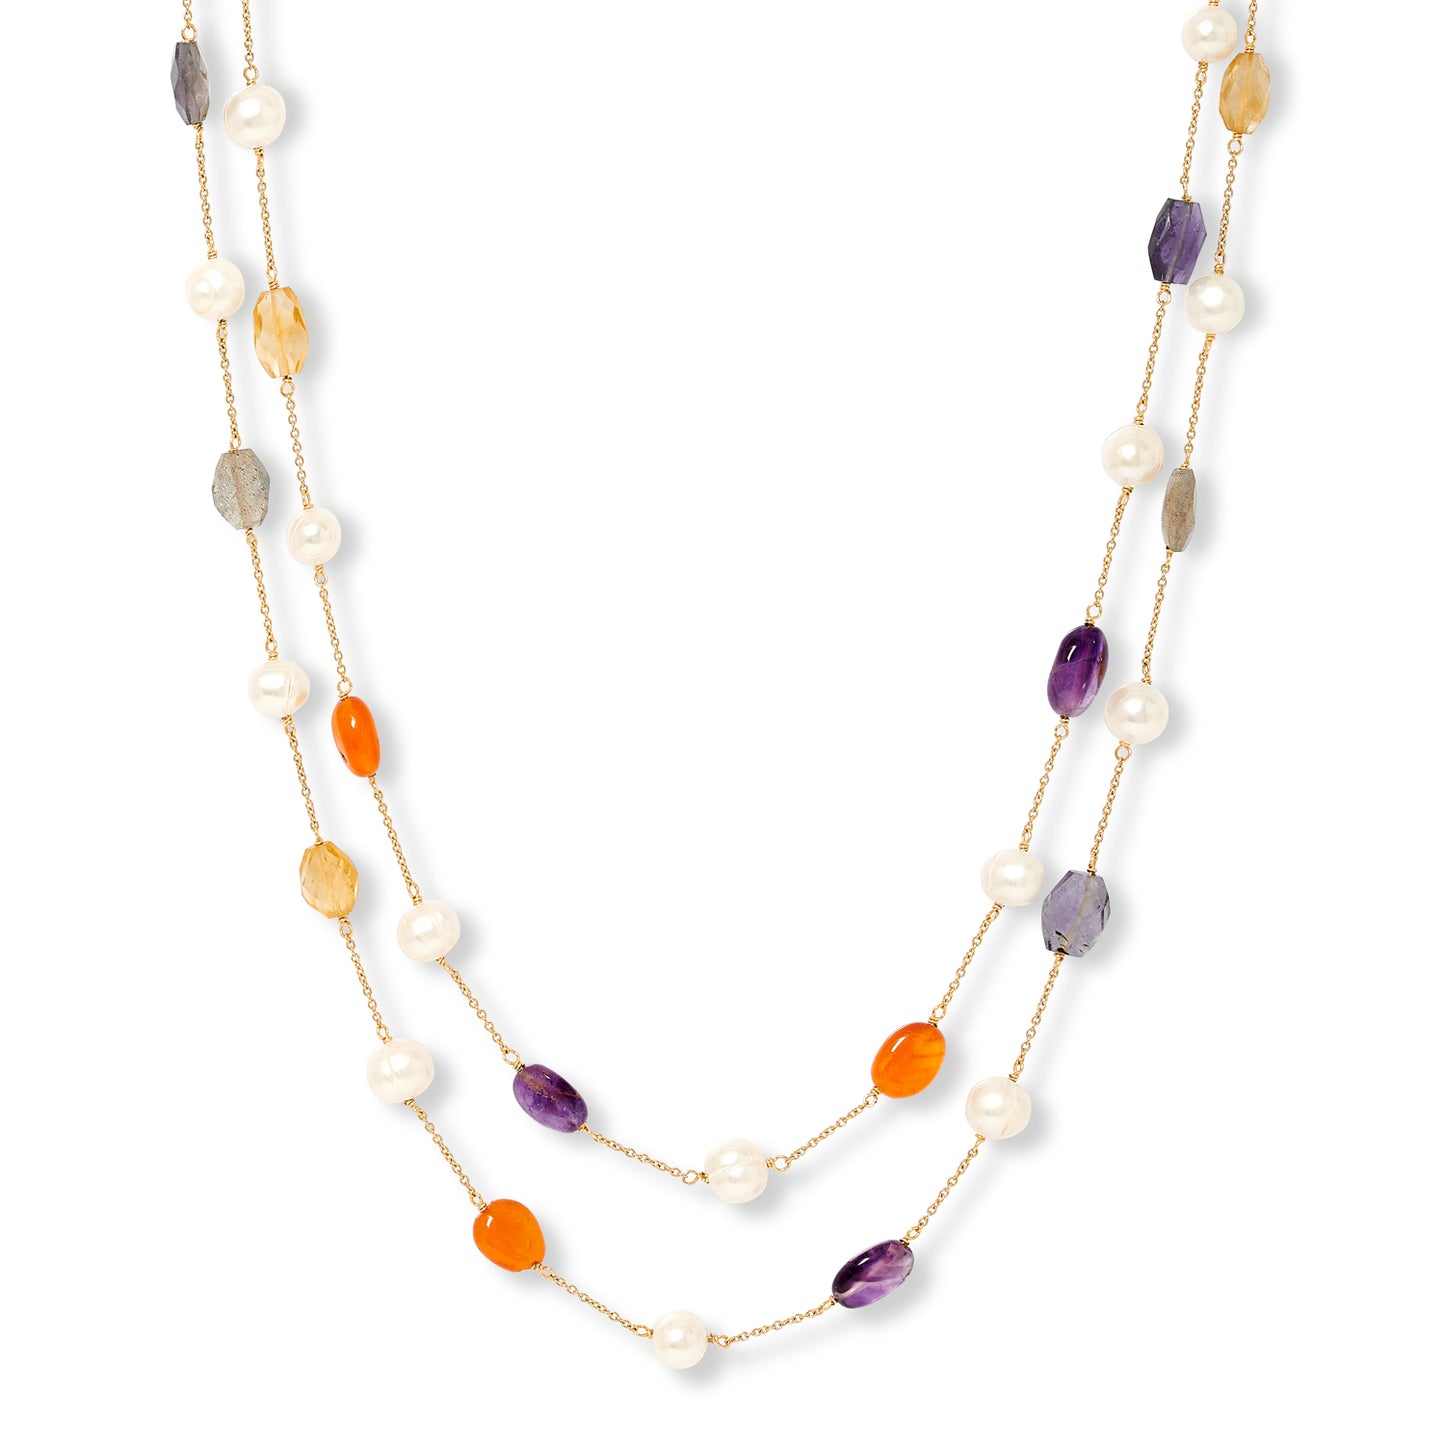 Clara fine chain necklace with scattered cultured freshwater pearls and gemstones